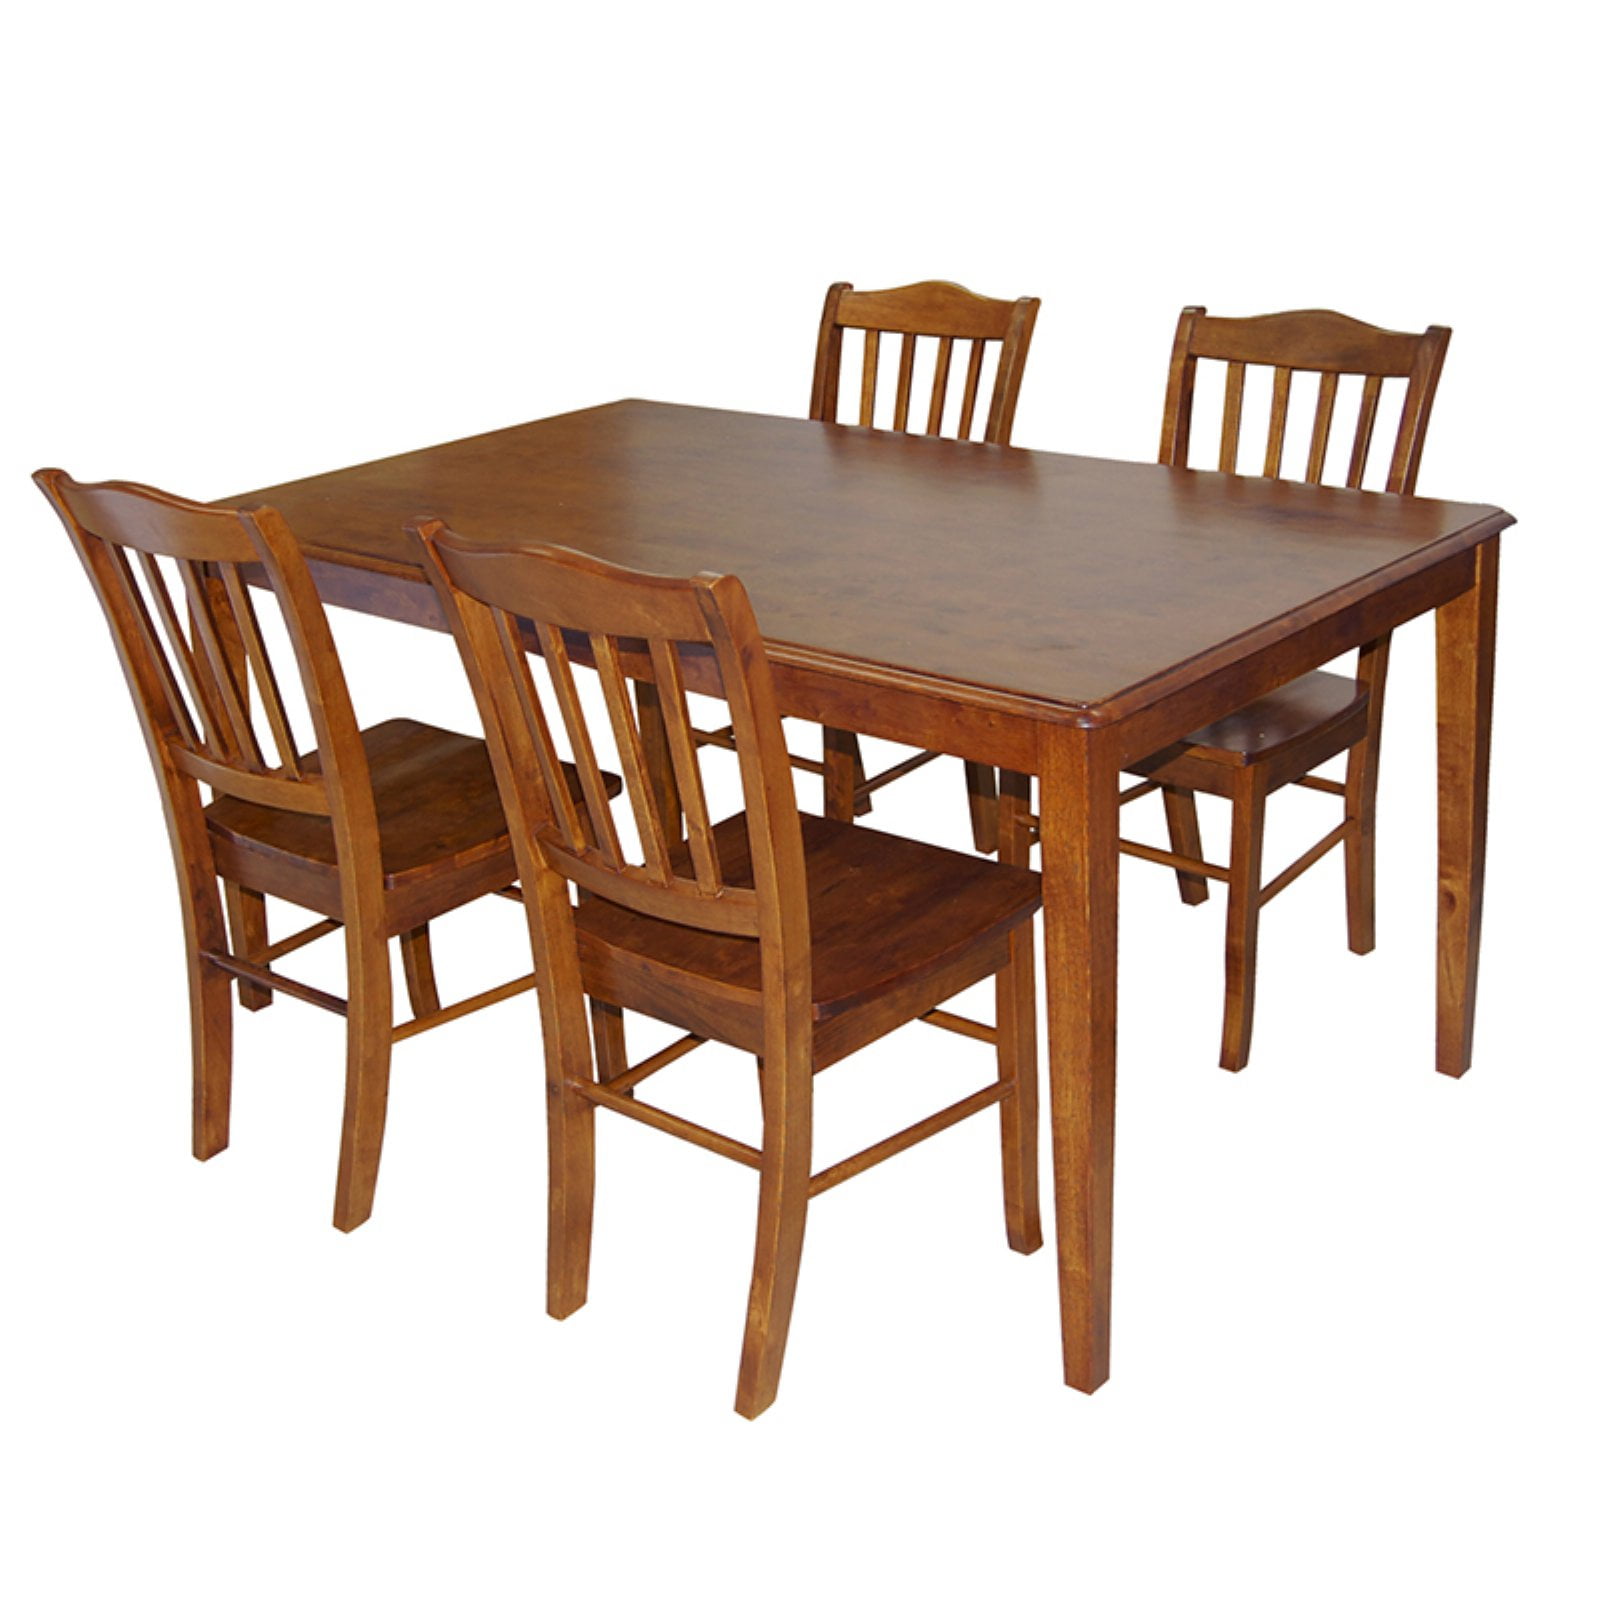 Boraam 5pc Shaker Dining Set Walnut, Shaker Dining Room Table And Chairs